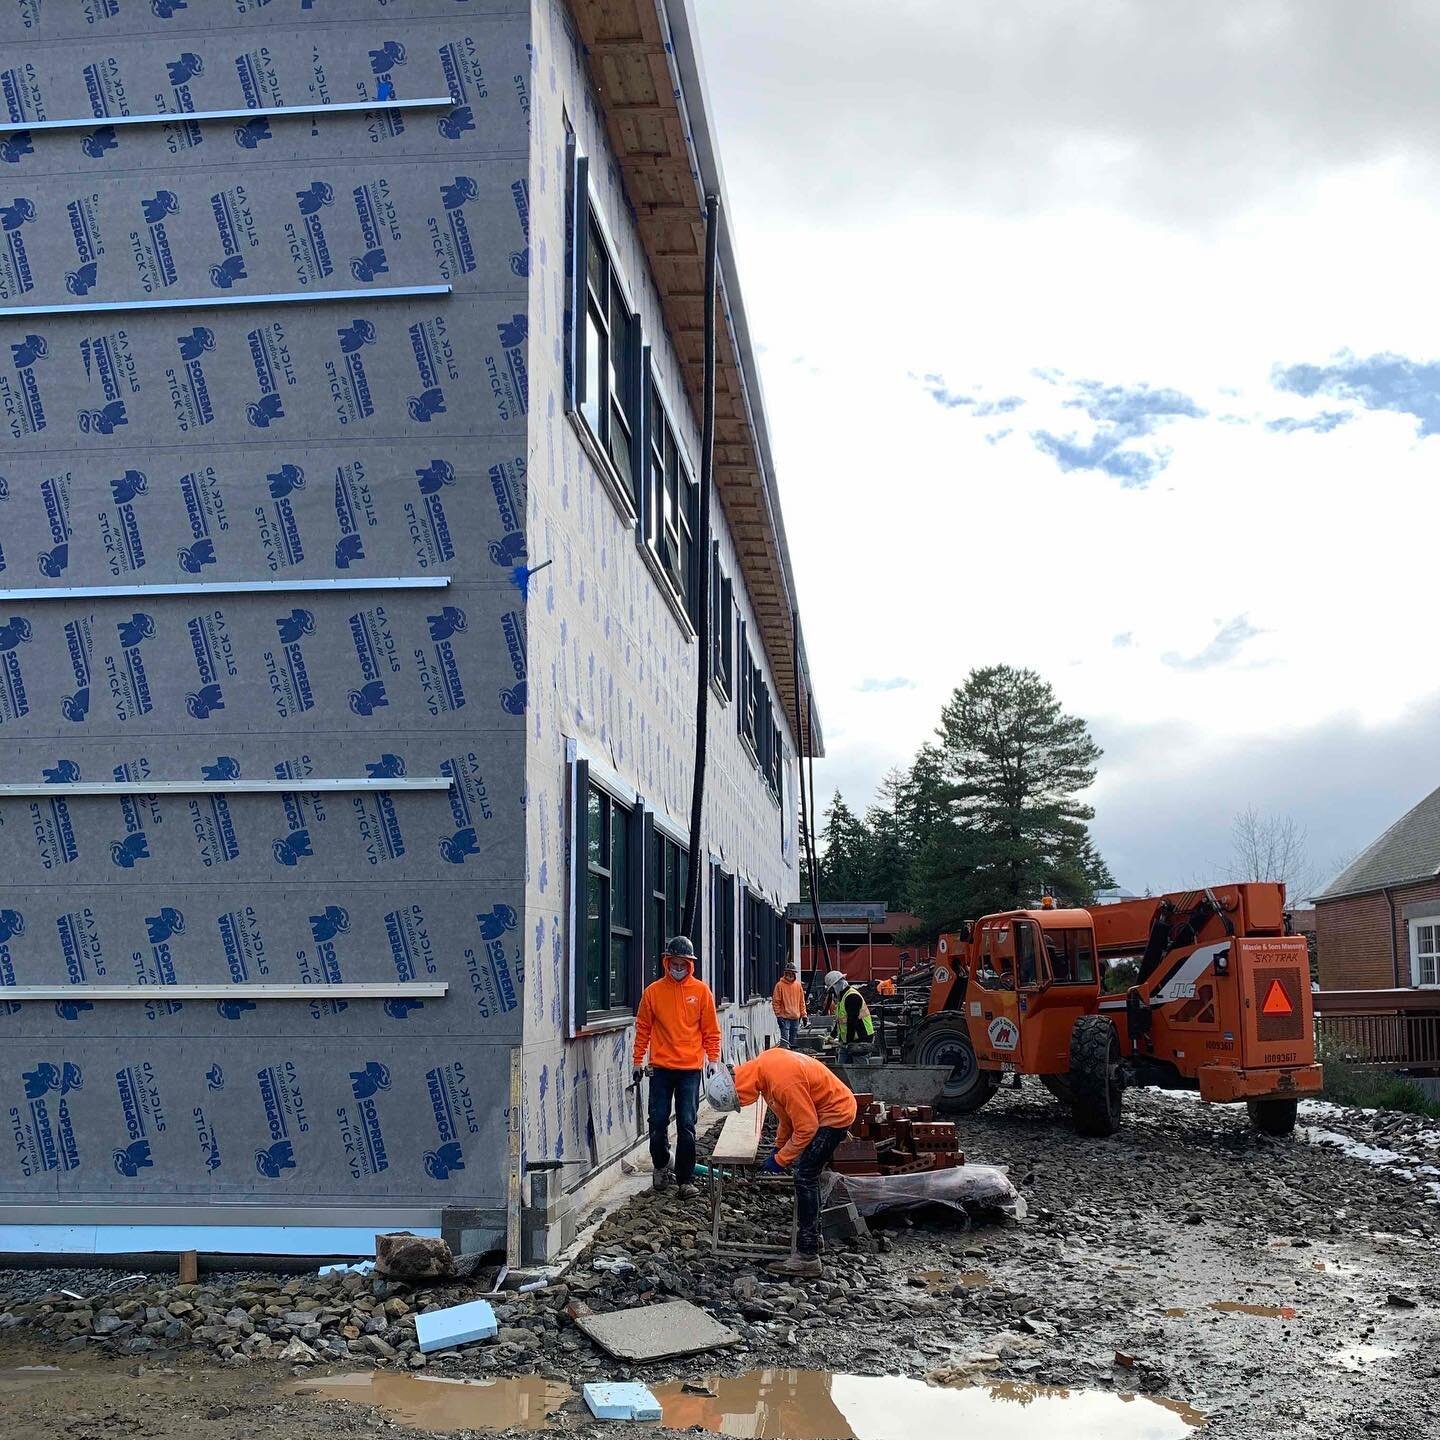 Kalama Middle School and our work on the old Elementary school building converting it into an Athletic Center. Great progress team! Happy Friday to you all. #Emerick #EmerickConstruction @kalamaschools #ESD112 #blrbarchitects @tedsteph02 @derickbaugh